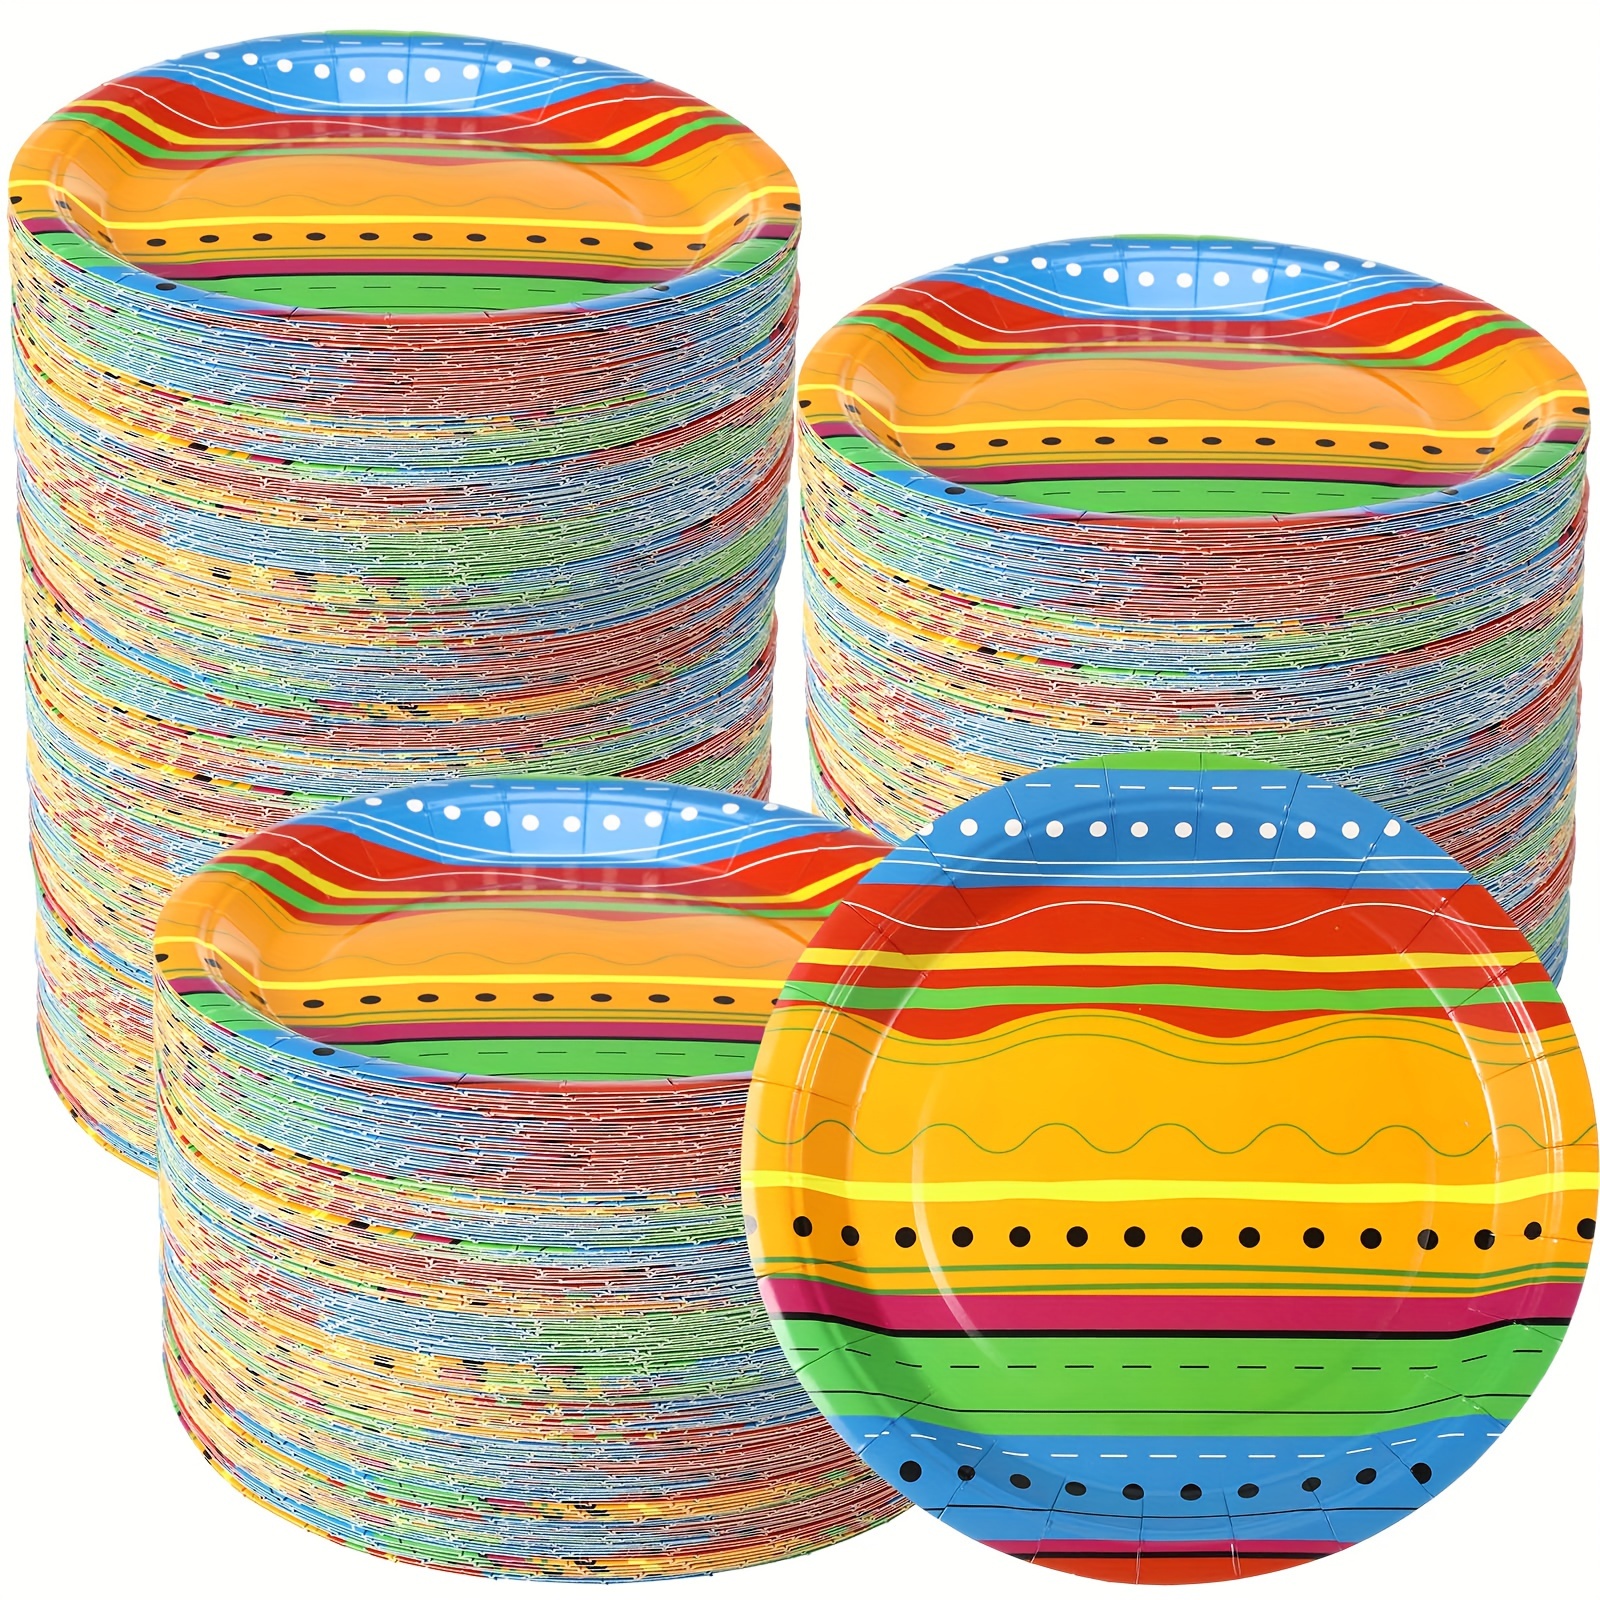 

200 Pieces Fiesta Paper Plates For Cinco De Mayo Party 9 Inch, Mexican Party Dessert Plates Taco Dinner Plates Party Supplies For Fiesta Tuesday Birthday Party Decorations (wavy Line)